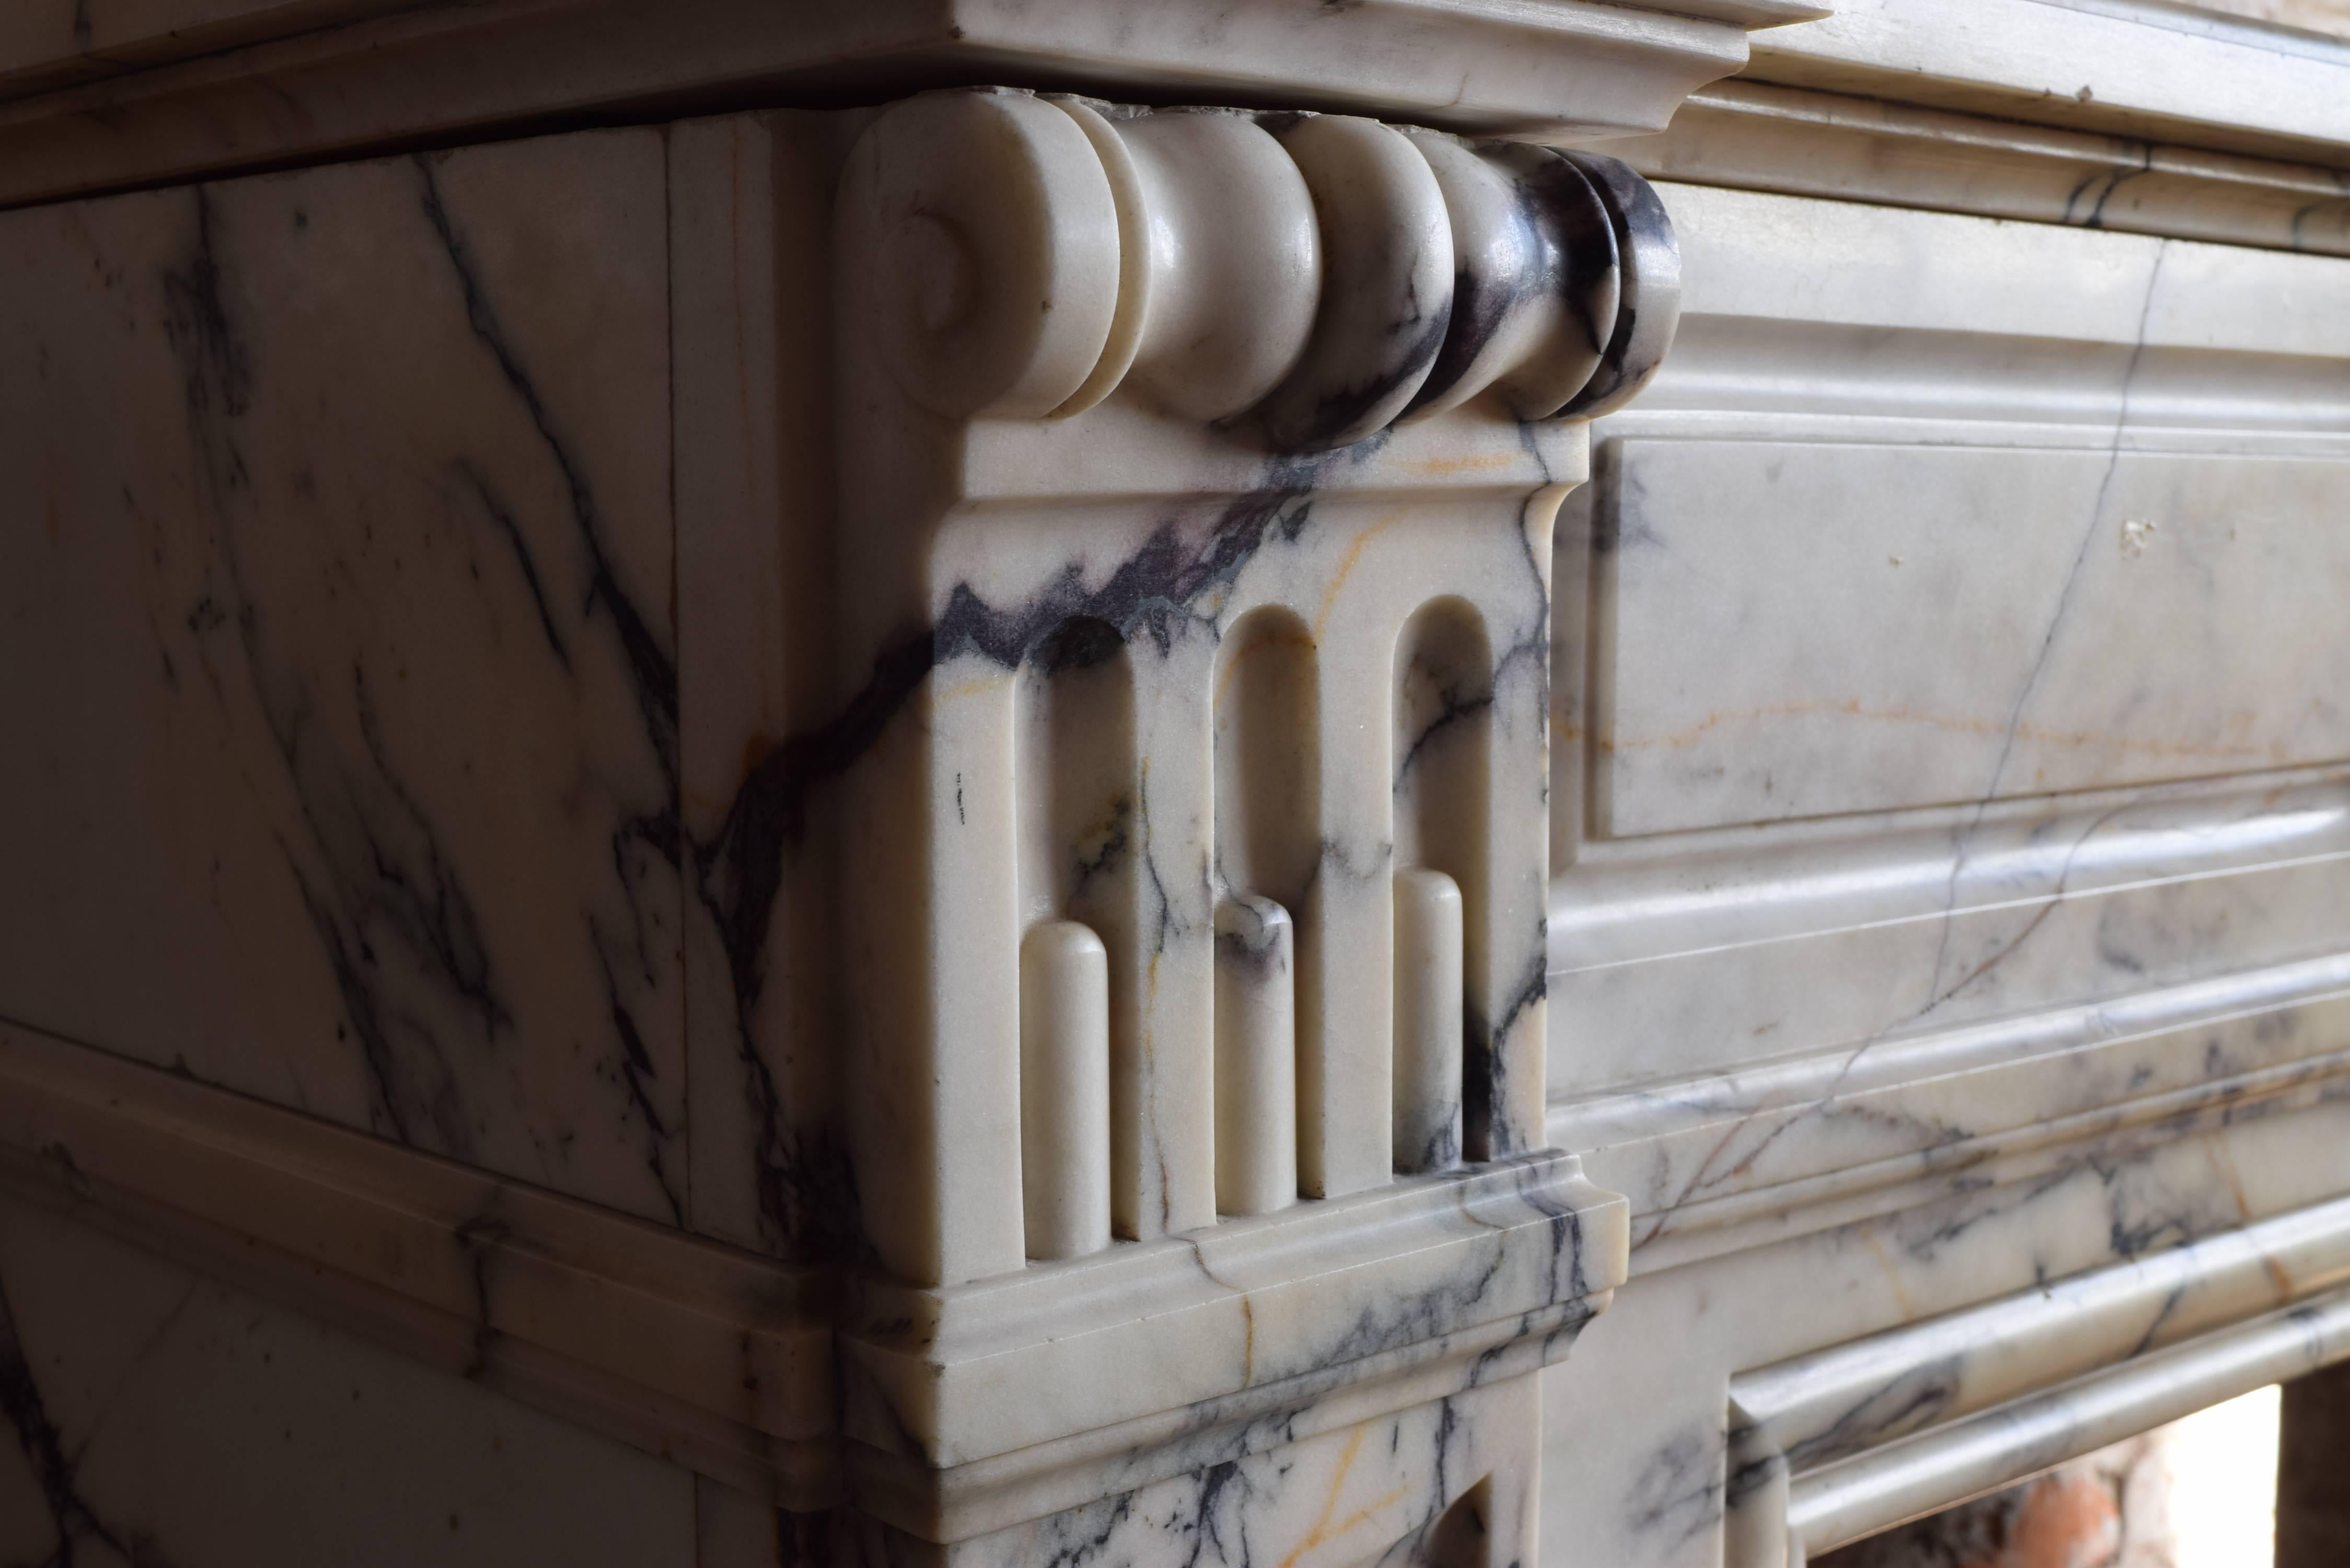 Italian Georgian Carved Marble Mantel, Probably Arabescato Marble, 18th-19th Century